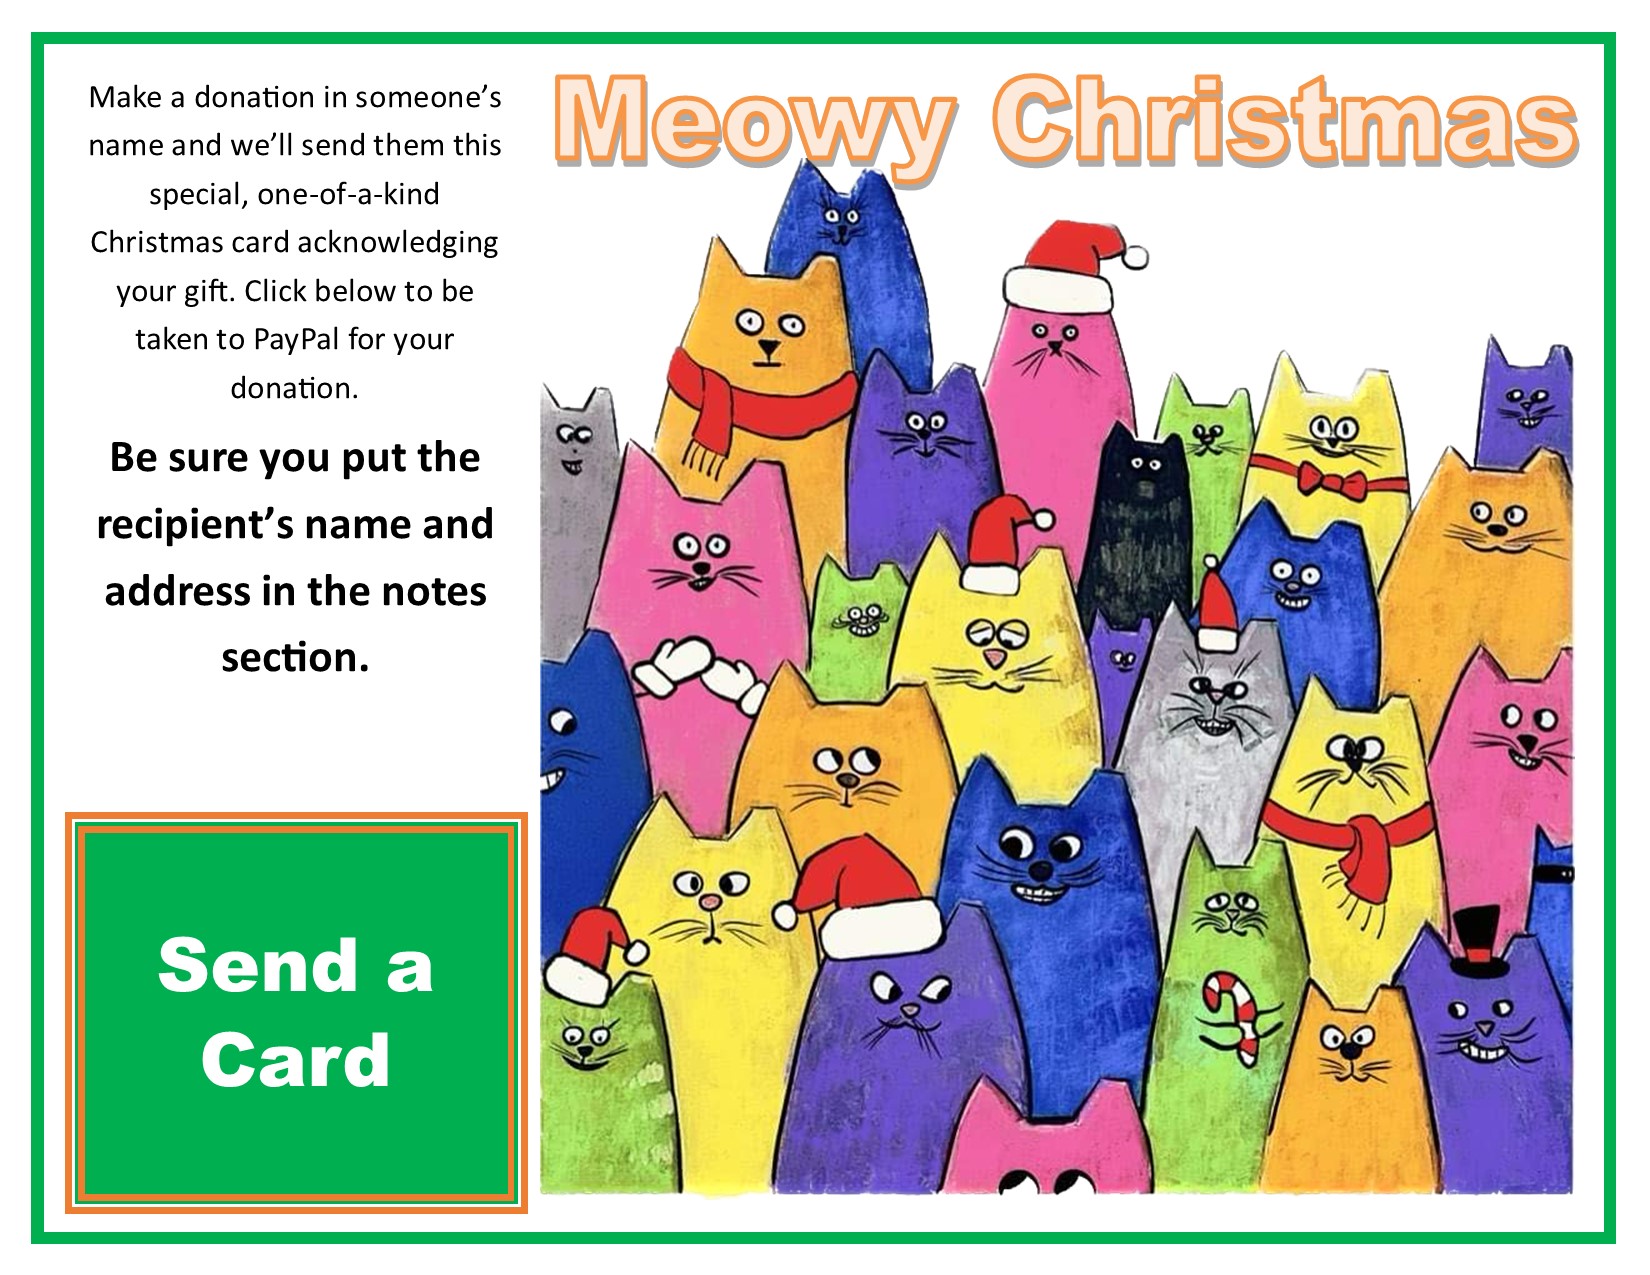 Meowy Christmas card with bright colored cartoon cats linked to PayPal to send card